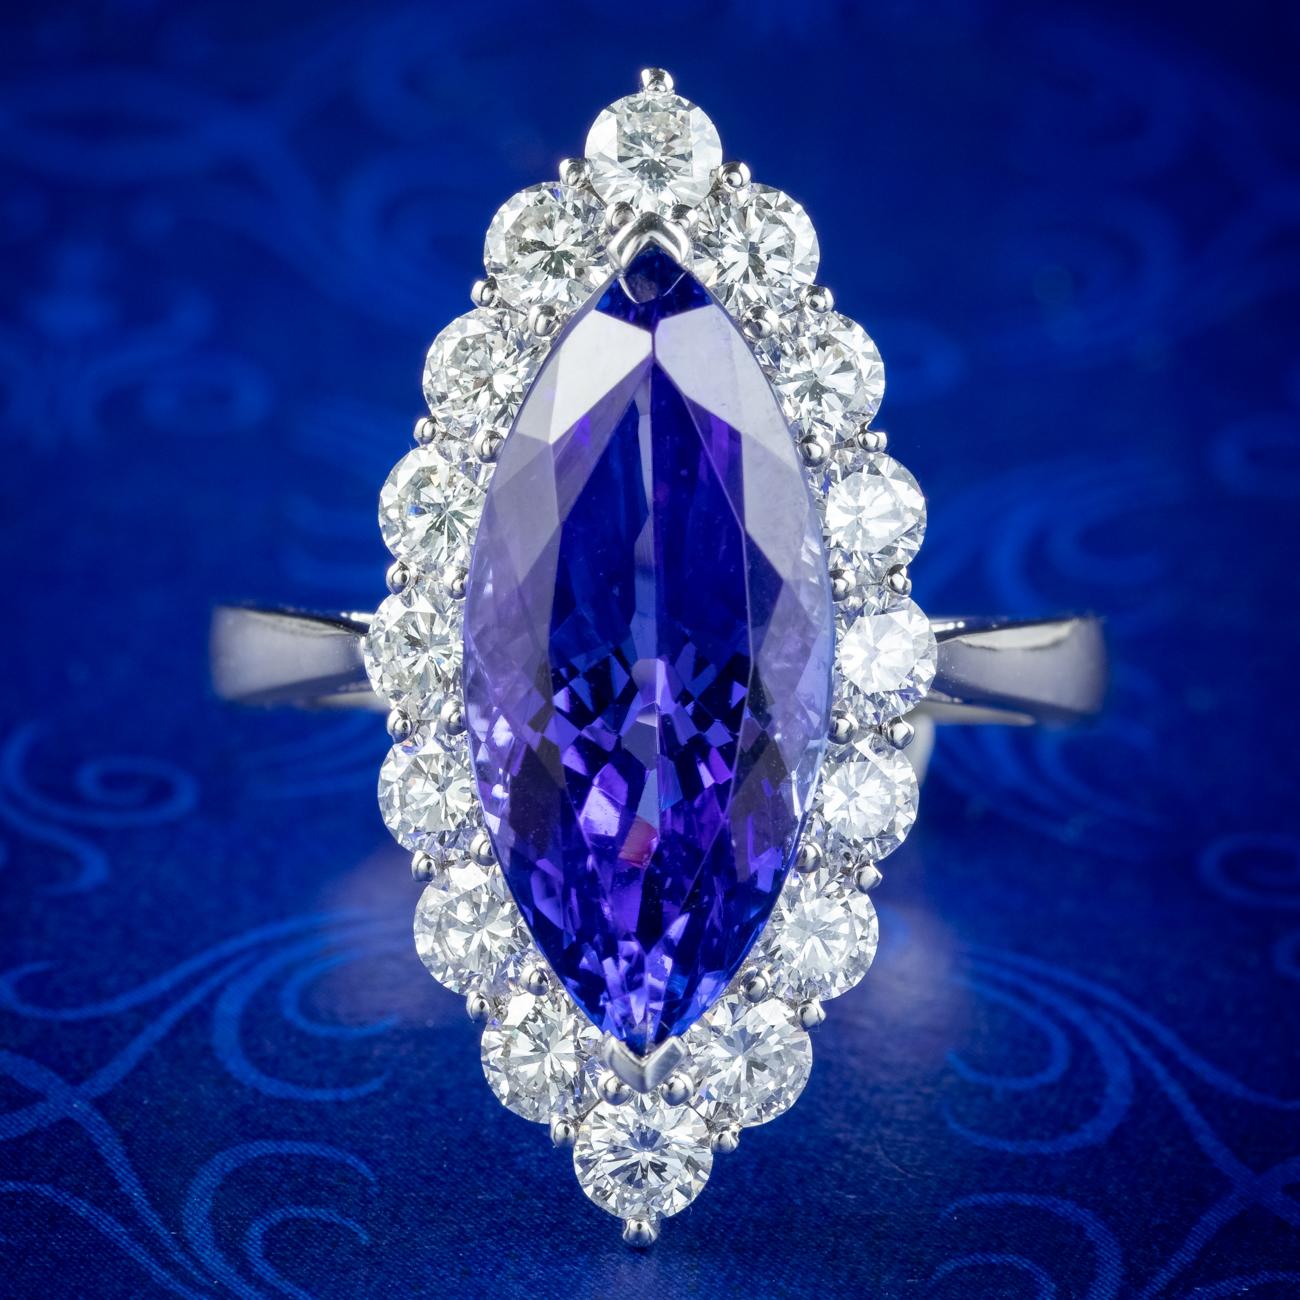 A stunning navette cluster ring built around a magnificent marquise cut tanzanite with an intense, deep blue hue with flashes of violet. It’s complete with a valuation which states the stone is an estimated AAA grade with eye-clean clarity and